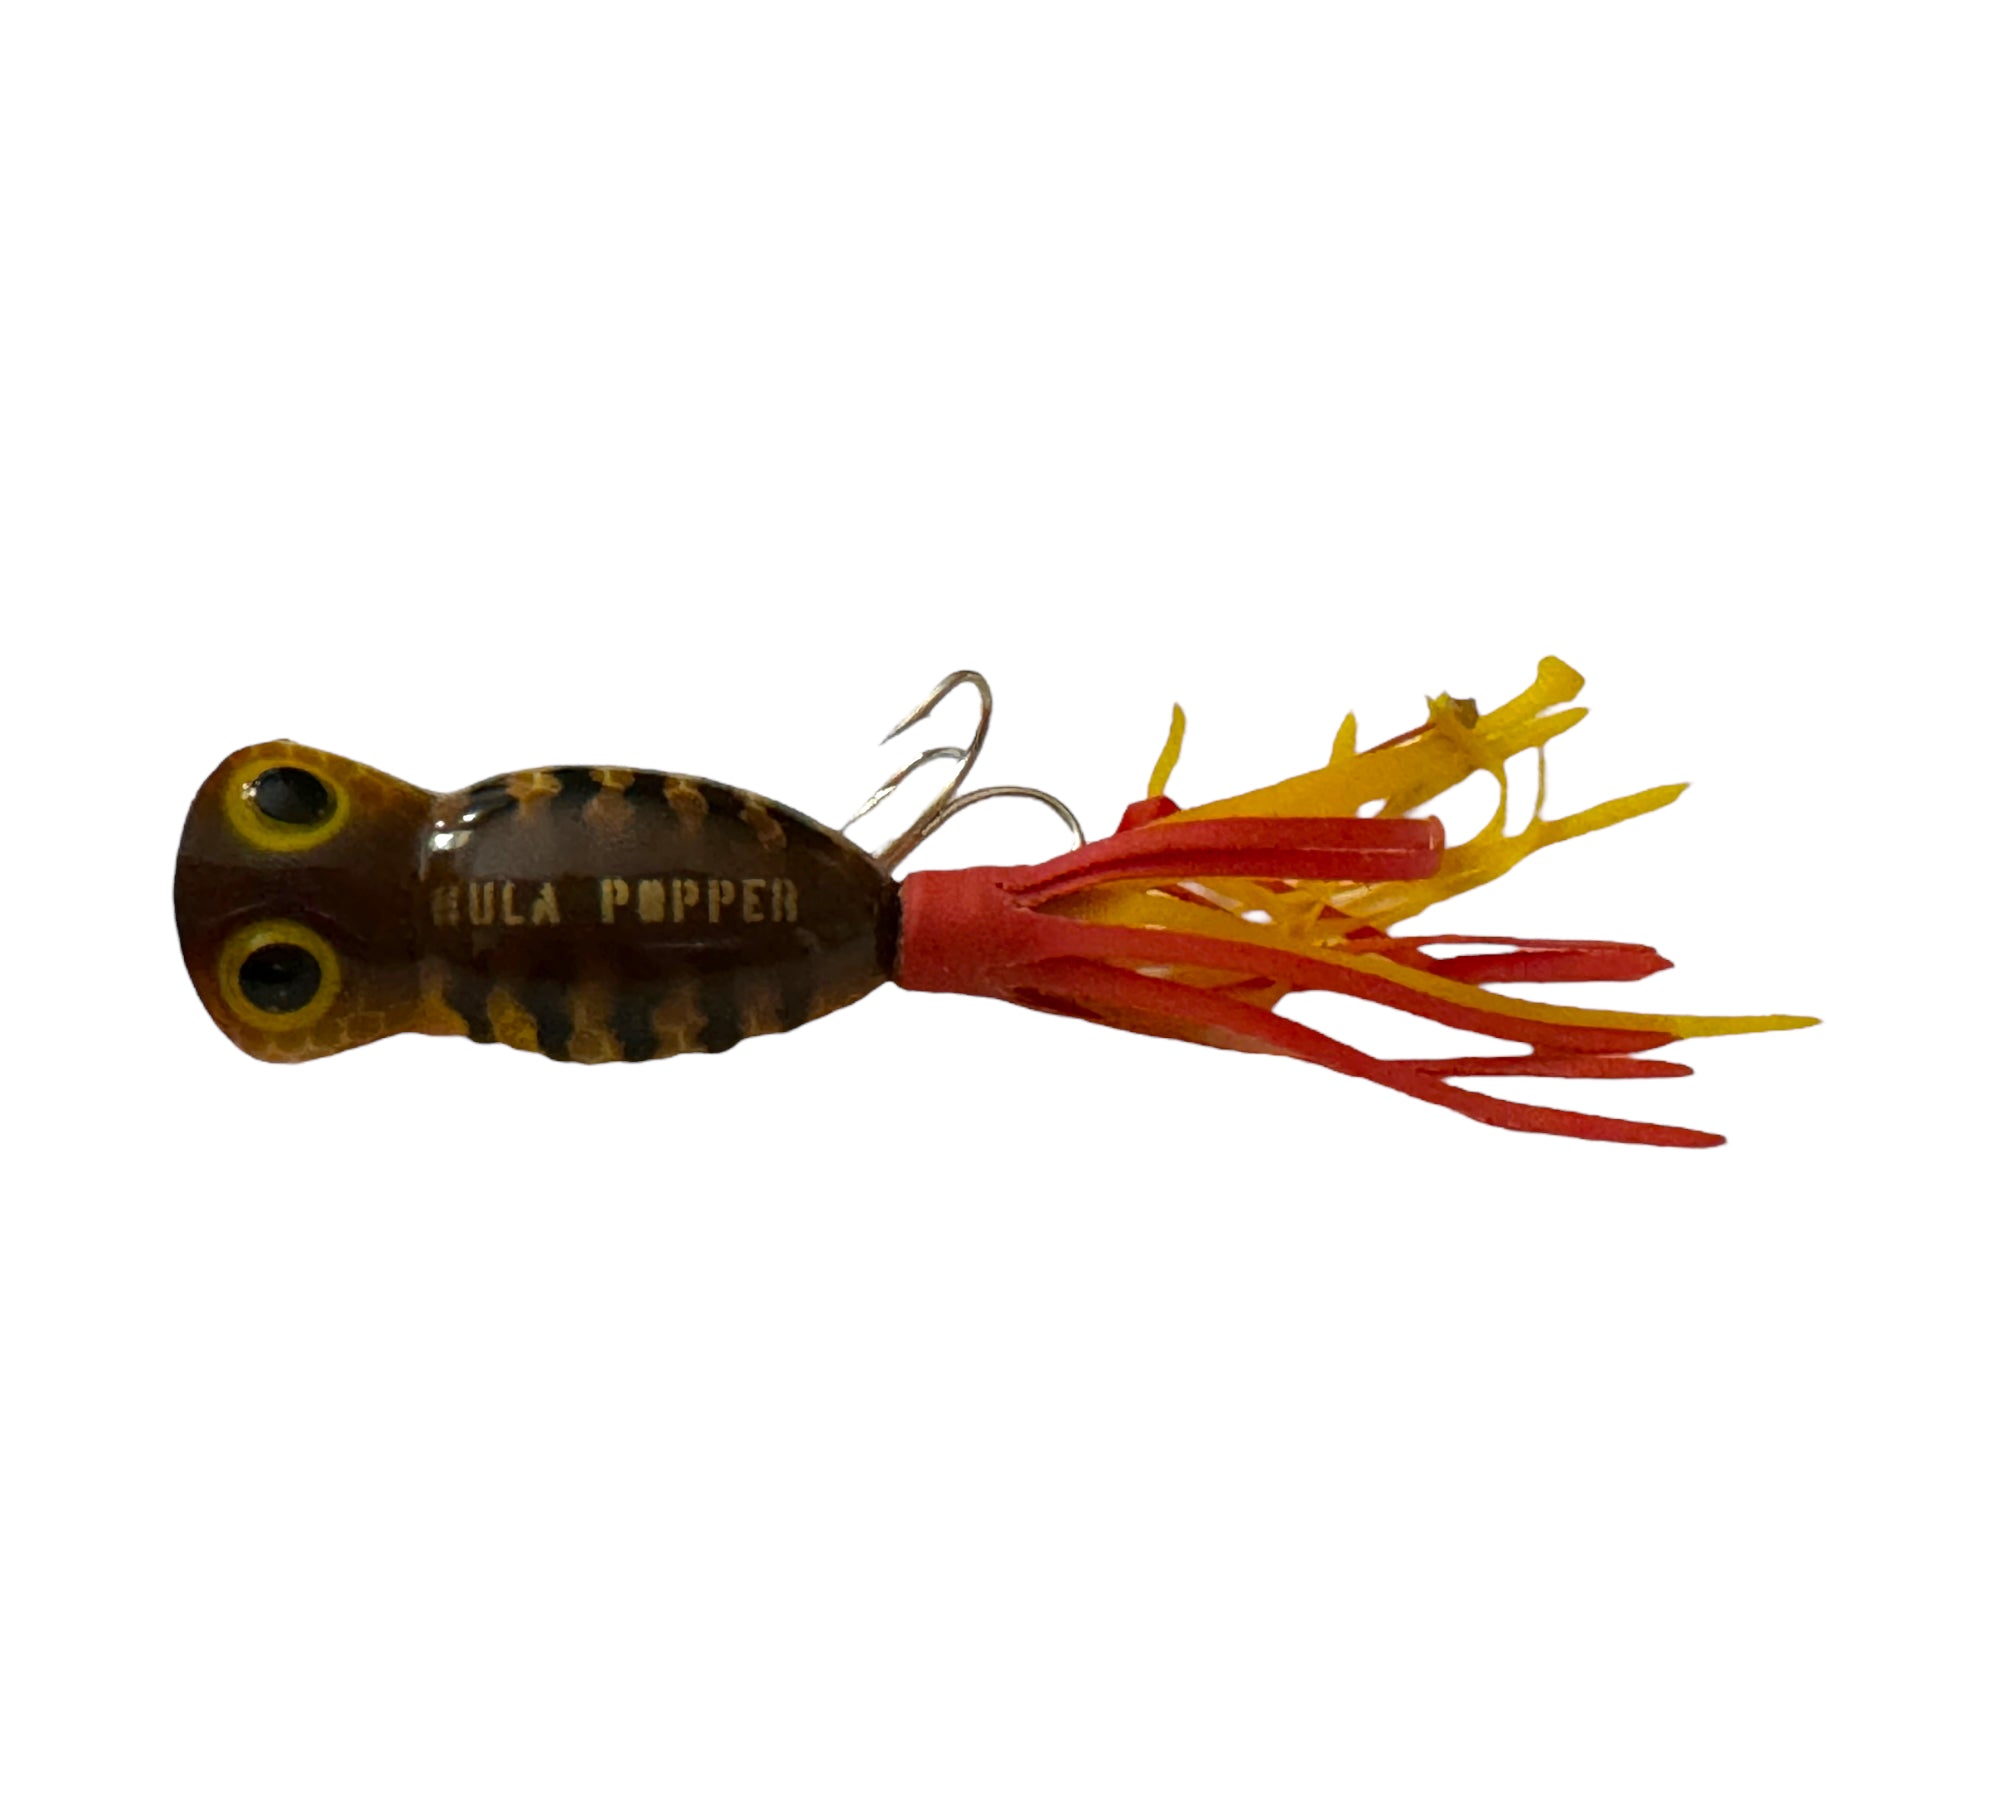 FRED ARBOGAST Fly Rod Size HULA POPPER Lure • BROWN PARROT – Toad